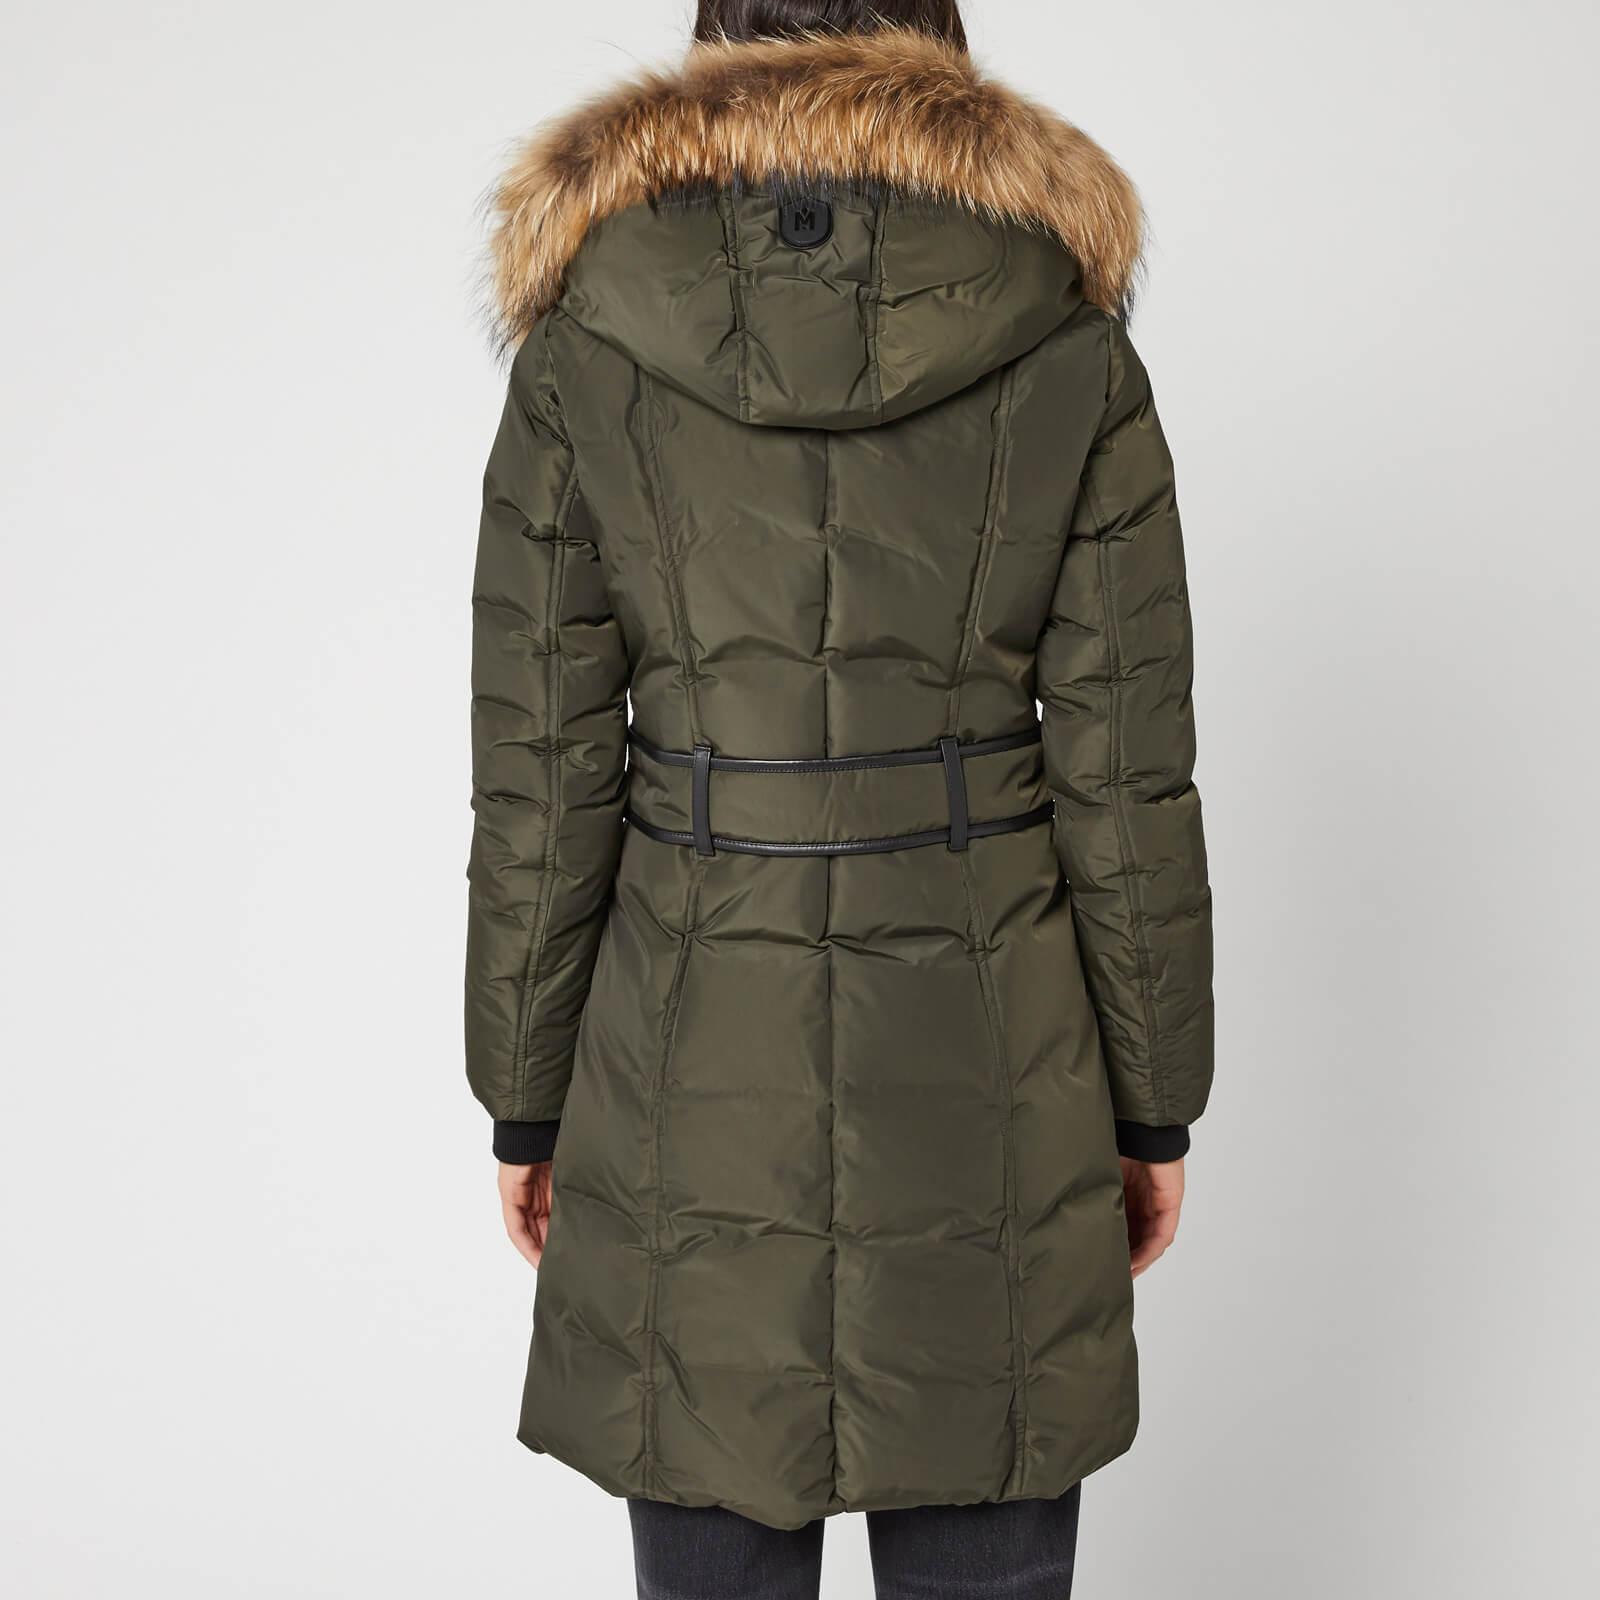 Mackage Kay Fur-Trimmed Down Parka in Army (Green) | Lyst